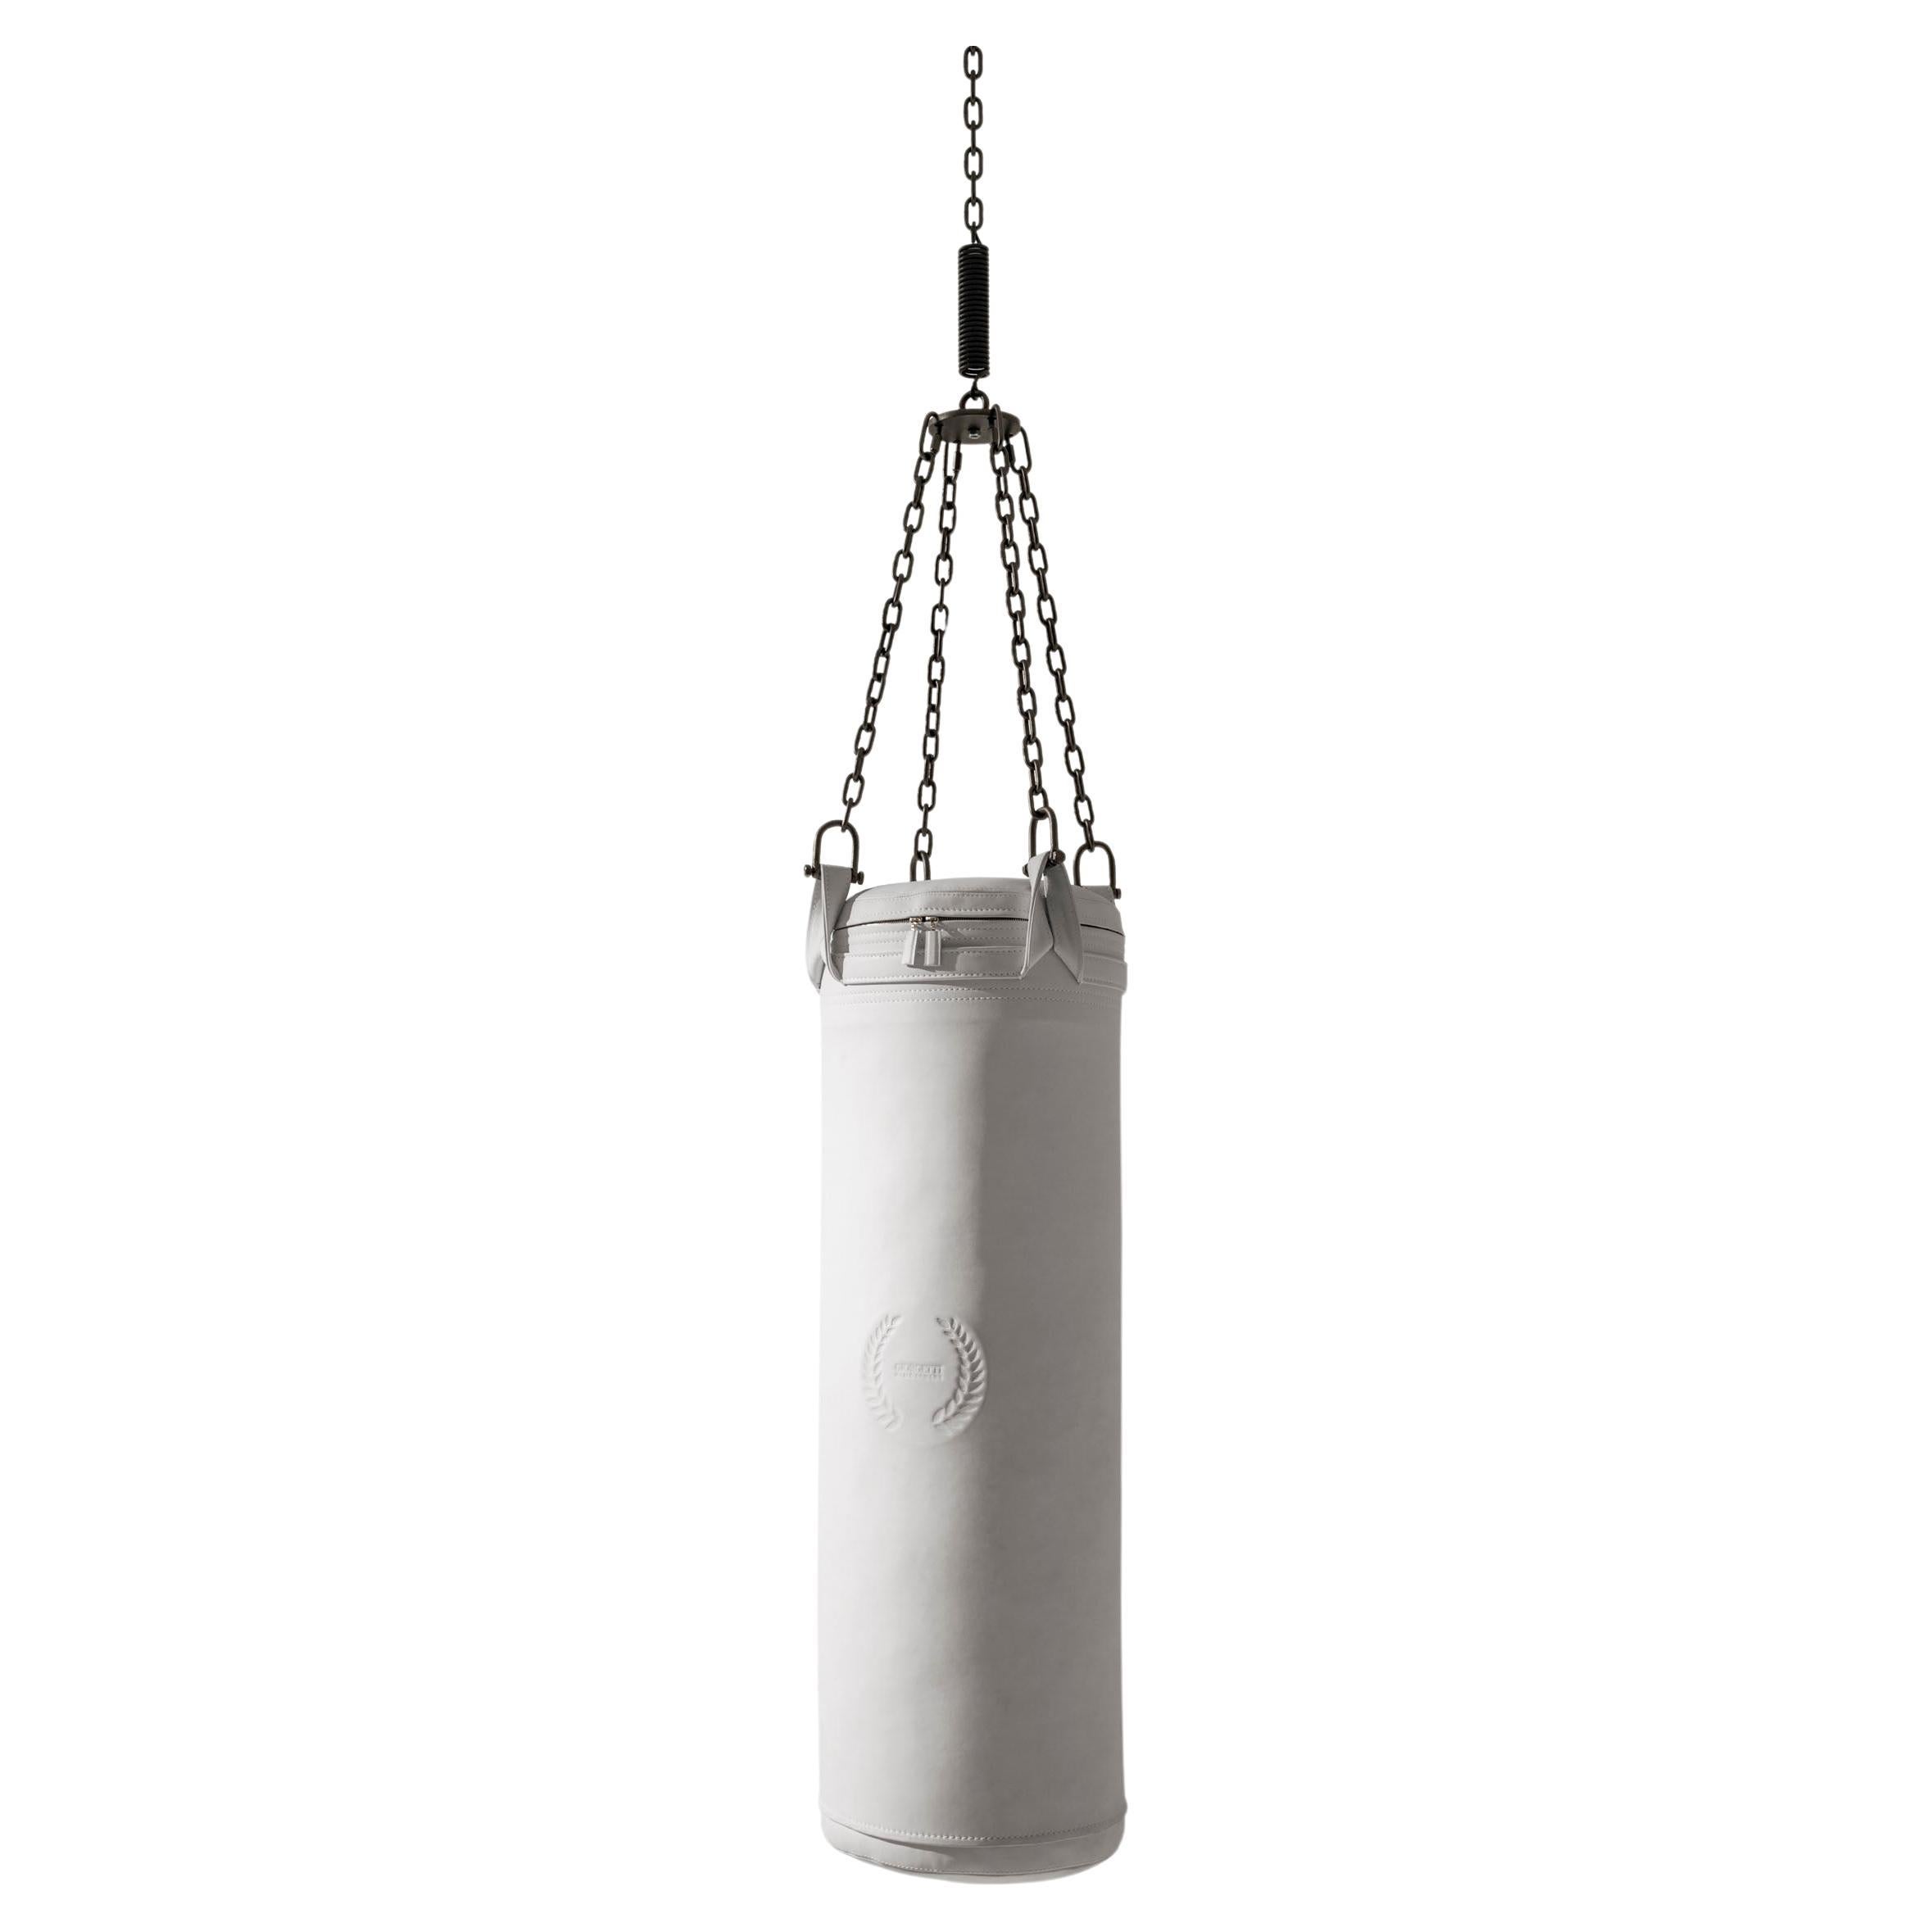 Ali, Leather Training Bag For Sale